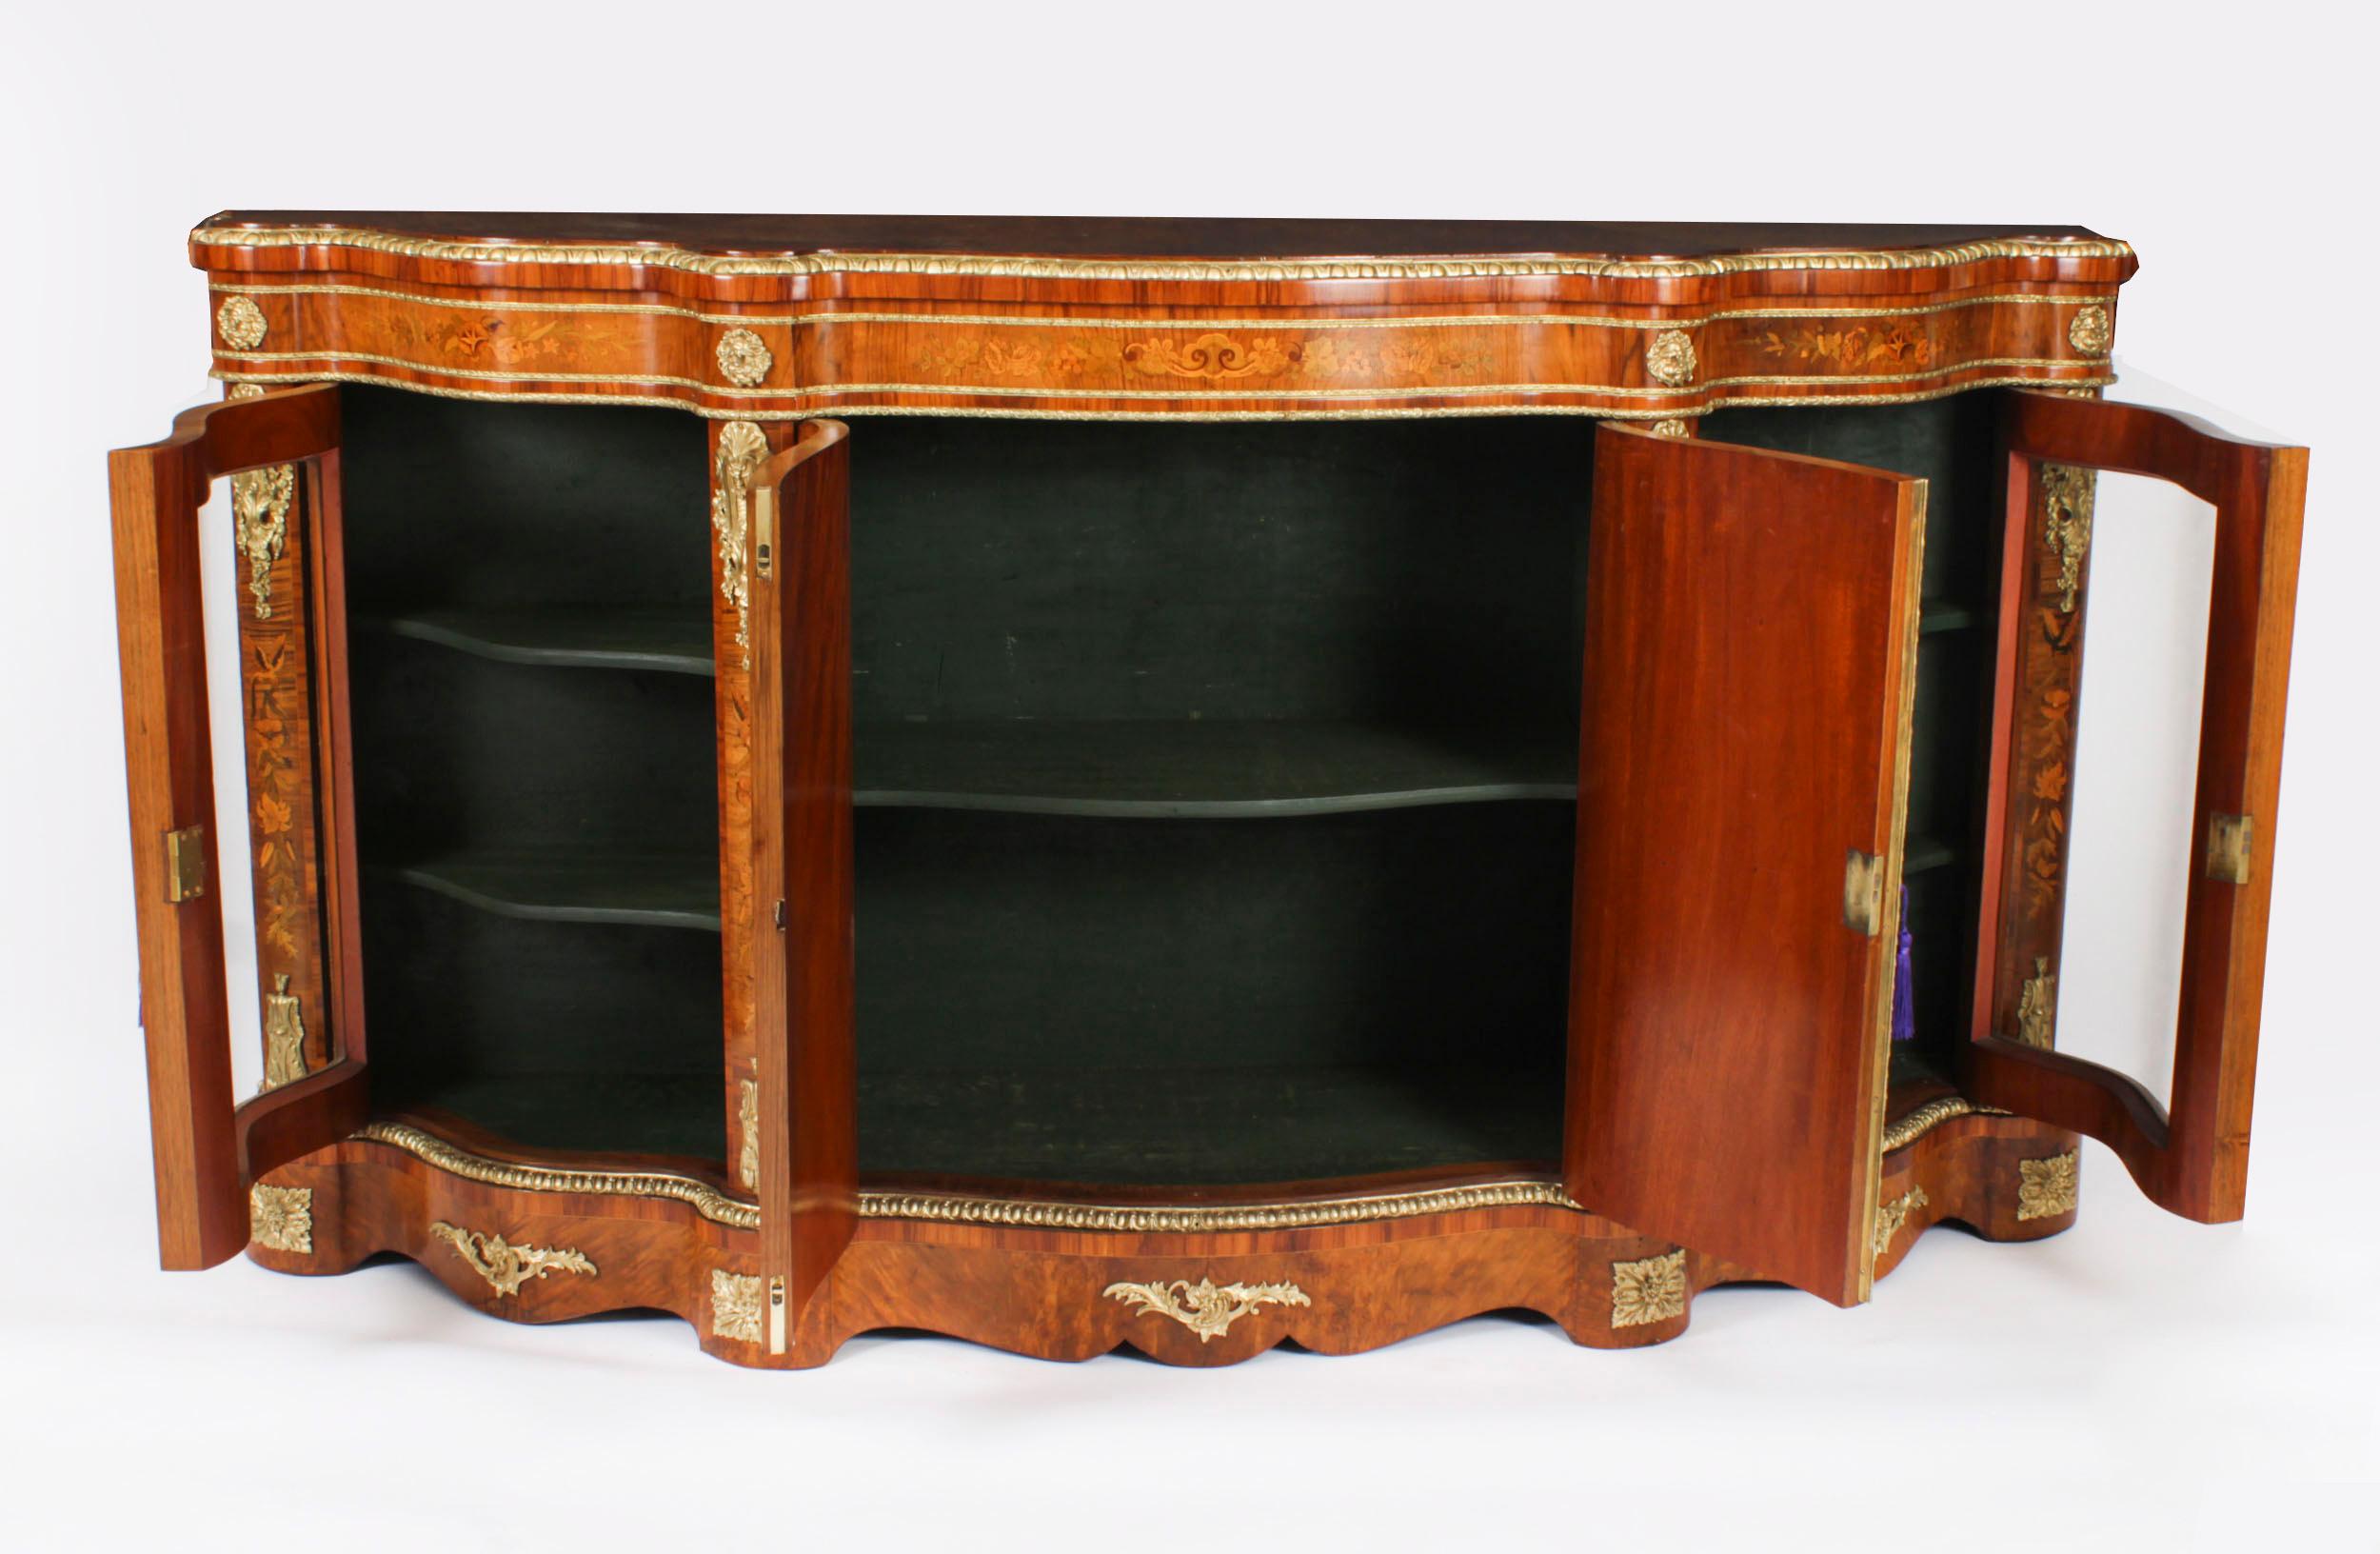 Antique Large Ormolu Mounted Walnut & Marquetry Serpentine Credenza 19th C For Sale 9